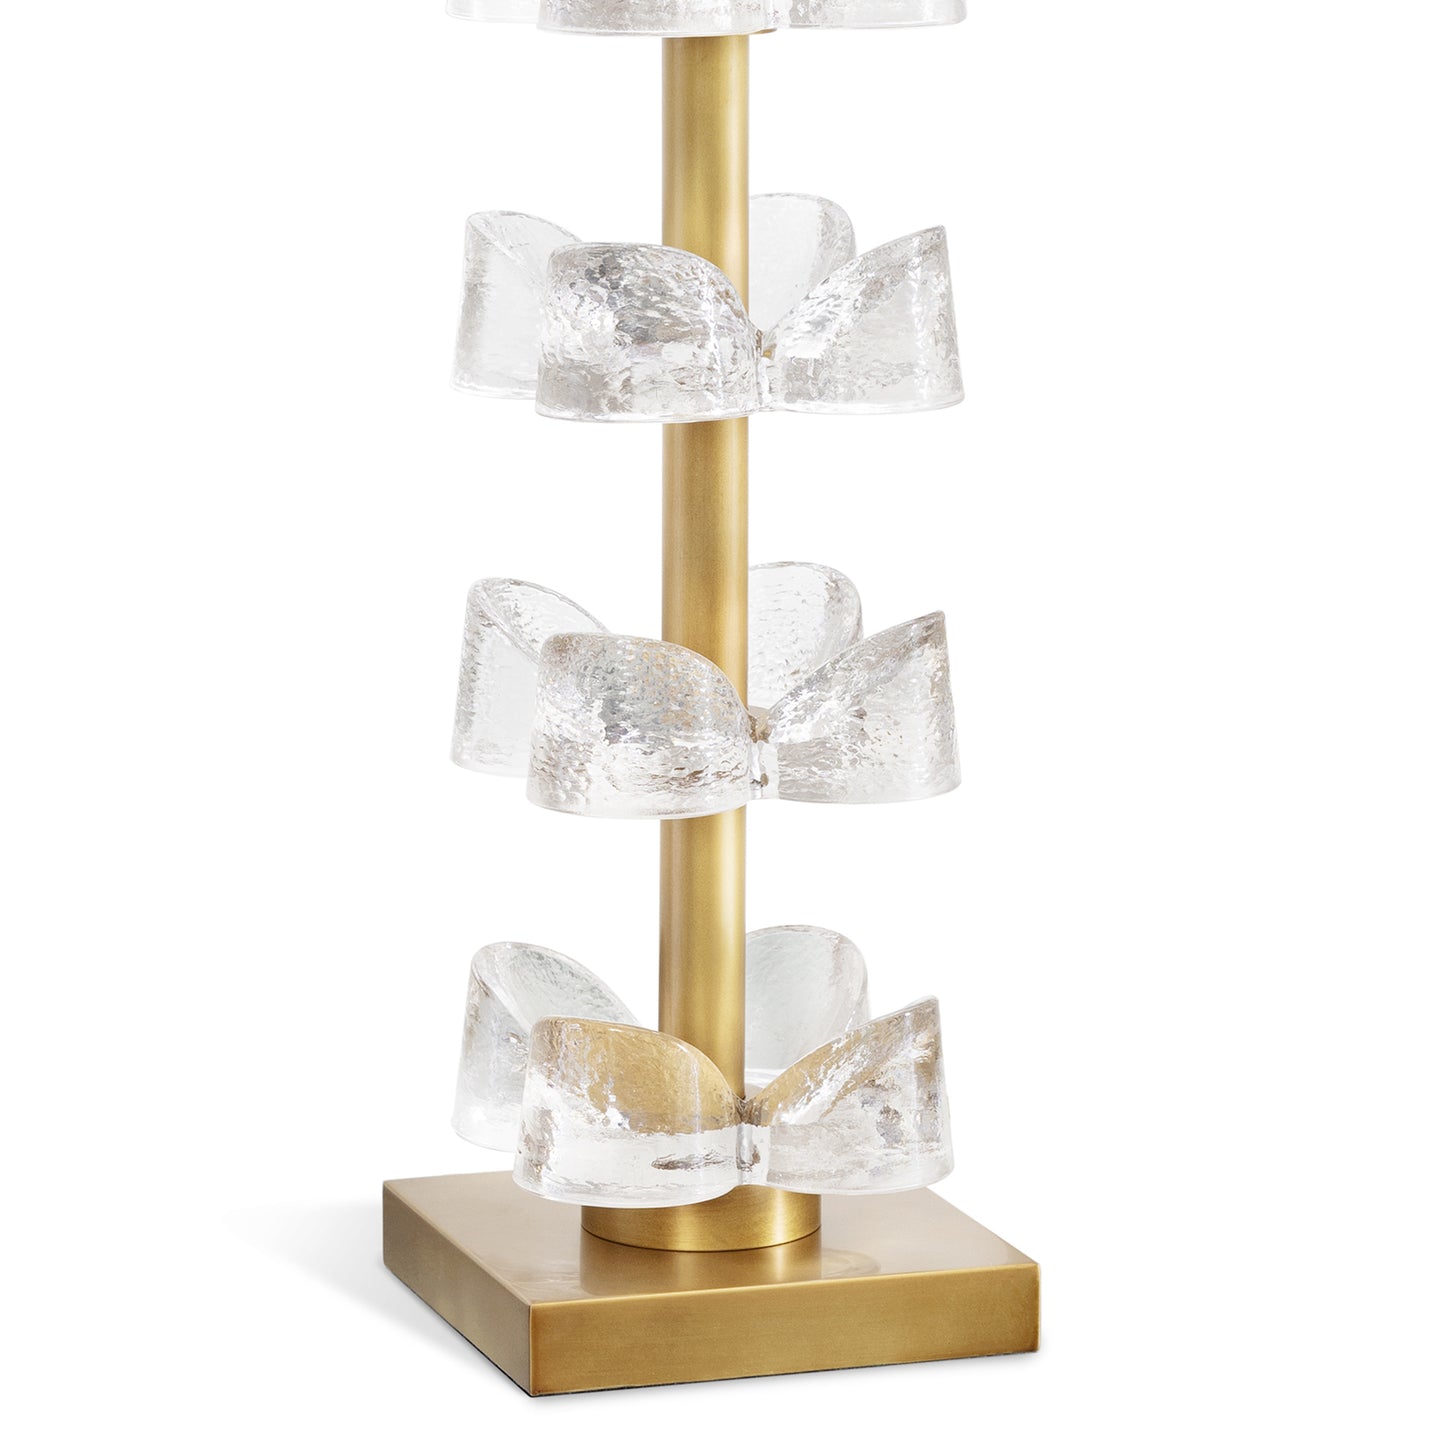 Bella Table Lamp in Natural Brass by Southern Living